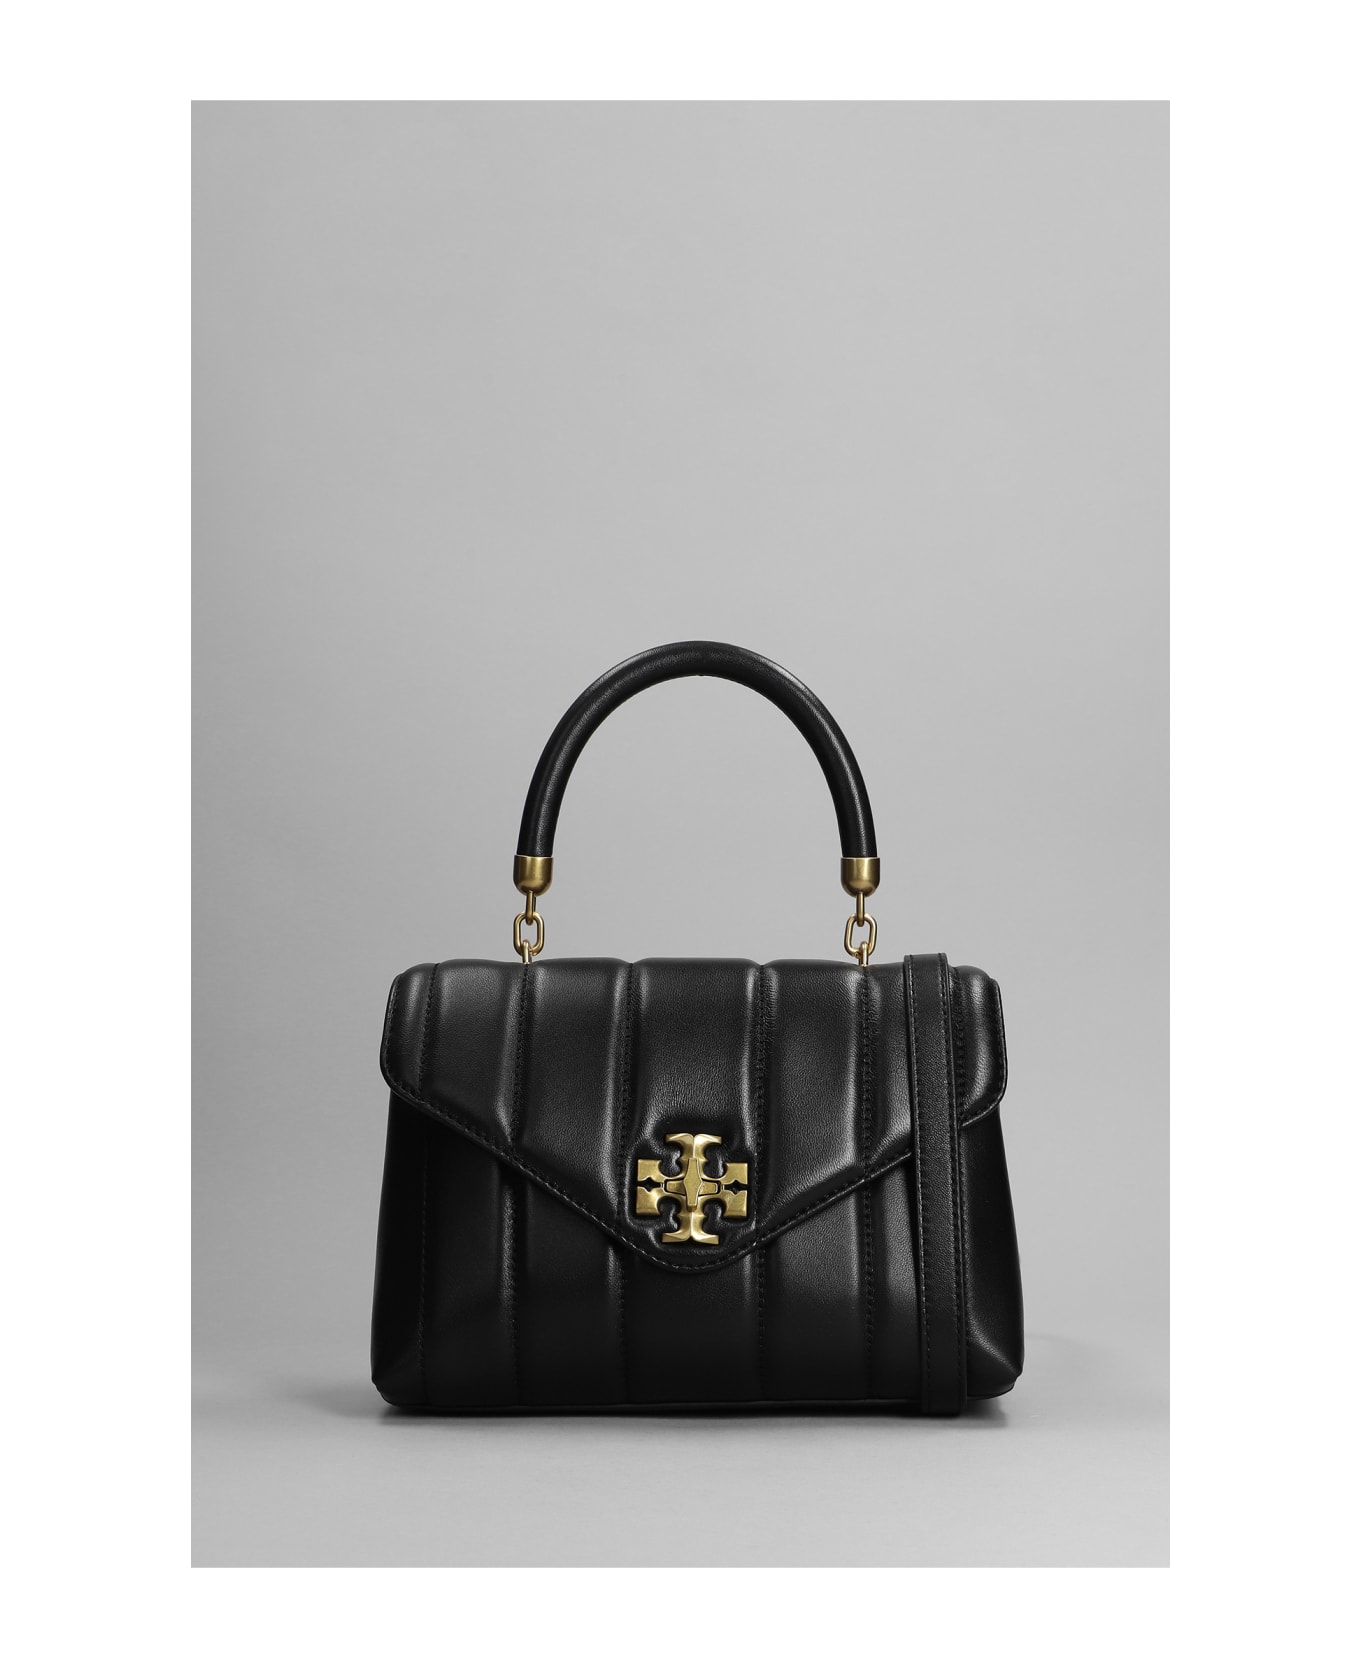 Tory Burch Hand Bag In Black Leather - black